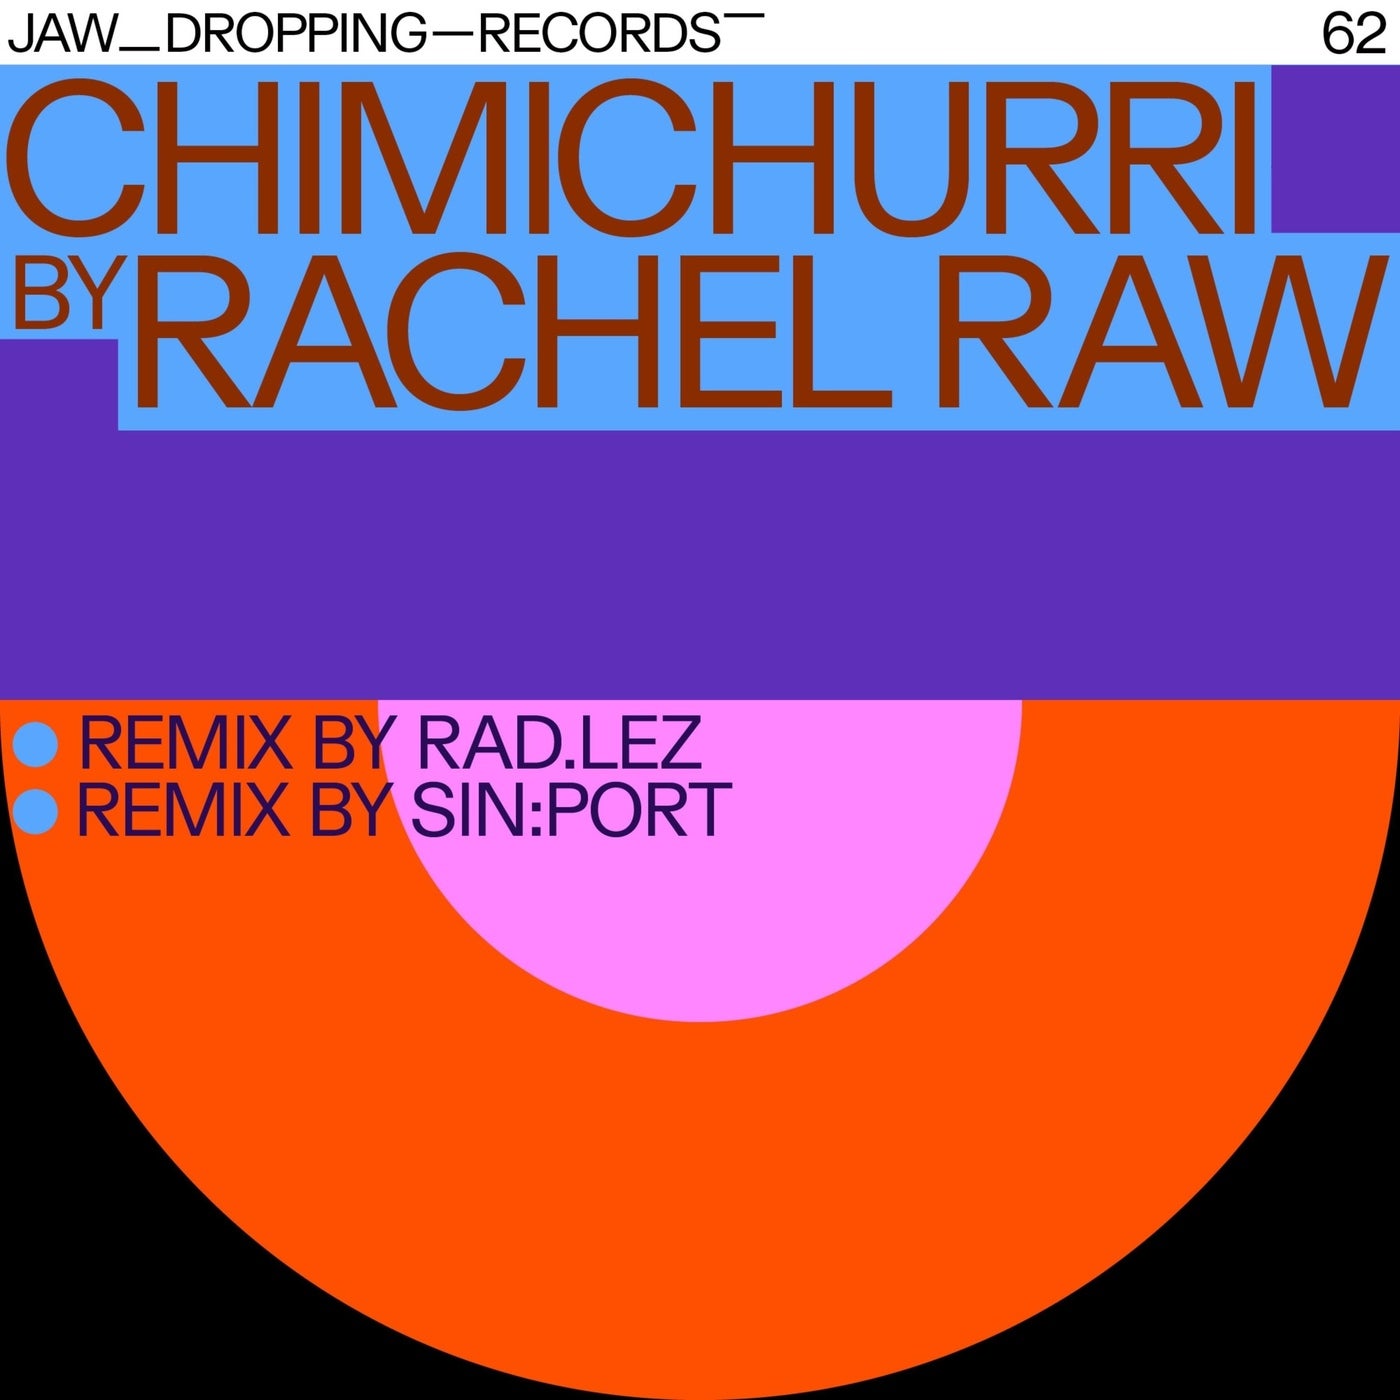 image cover: Rachel Raw - Chimichurri on Jaw Dropping Records